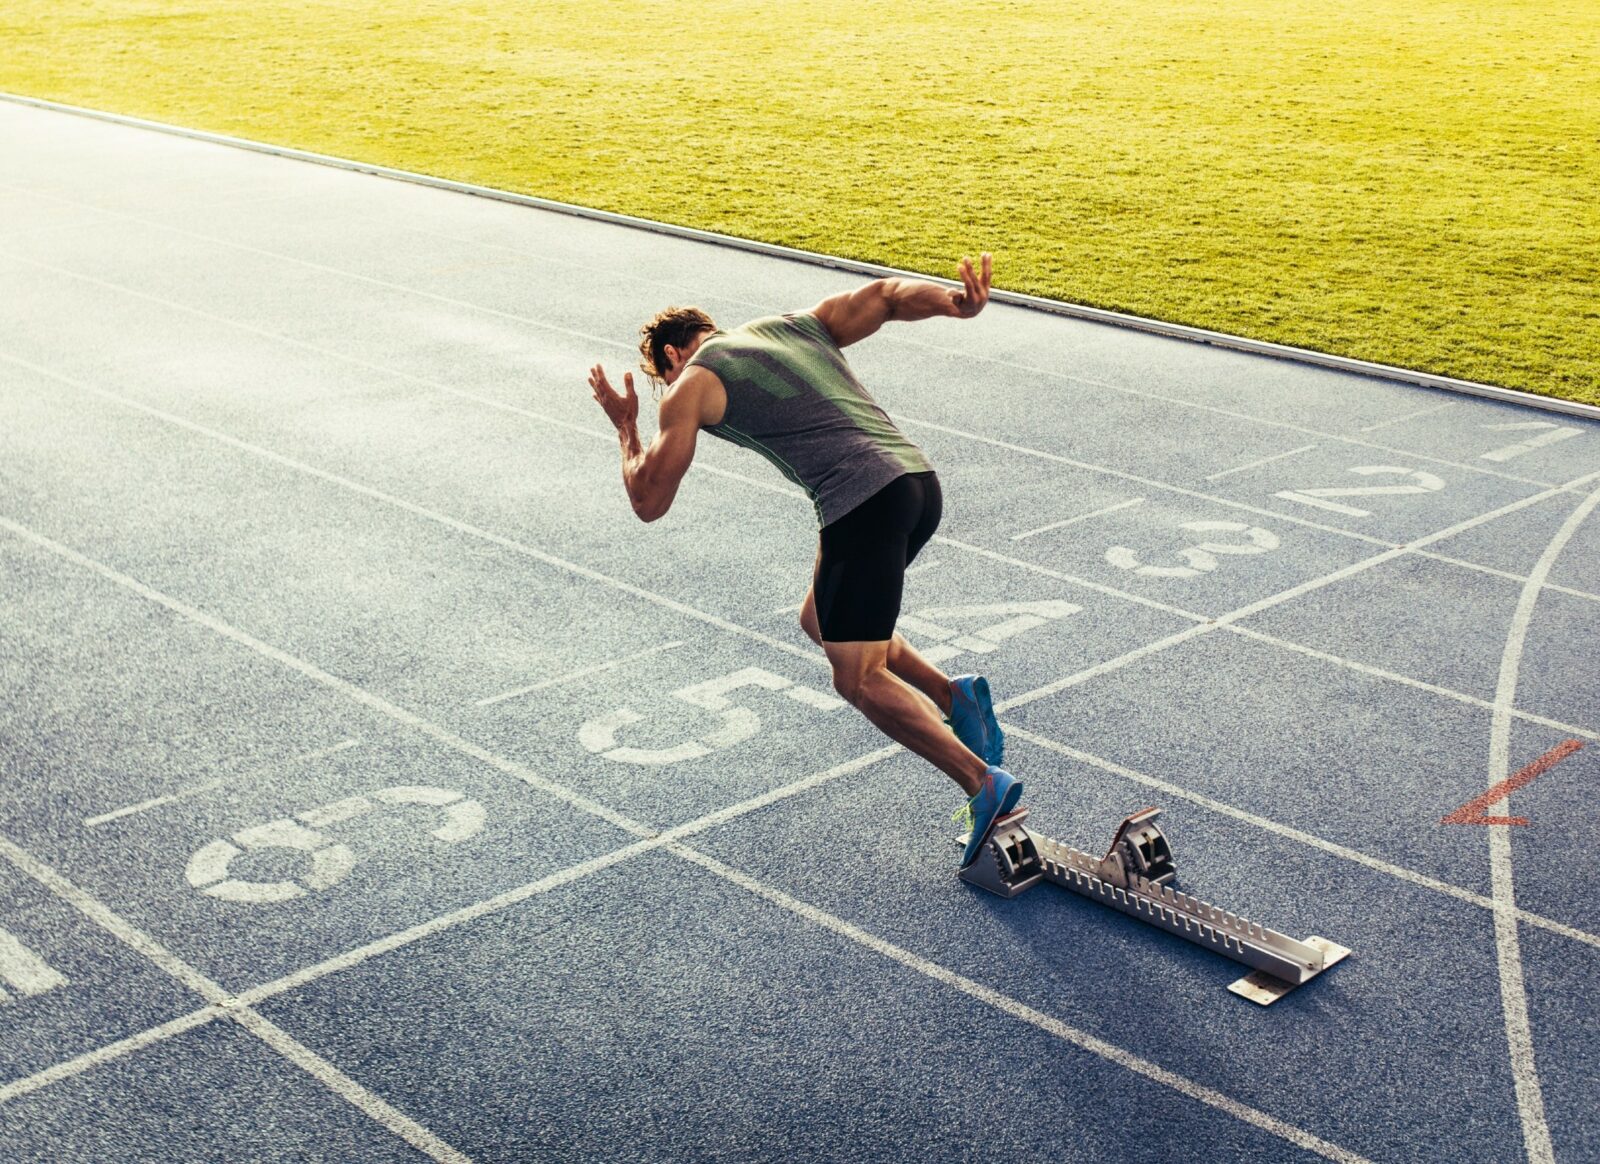 Rear view of an athlete starting his sprint